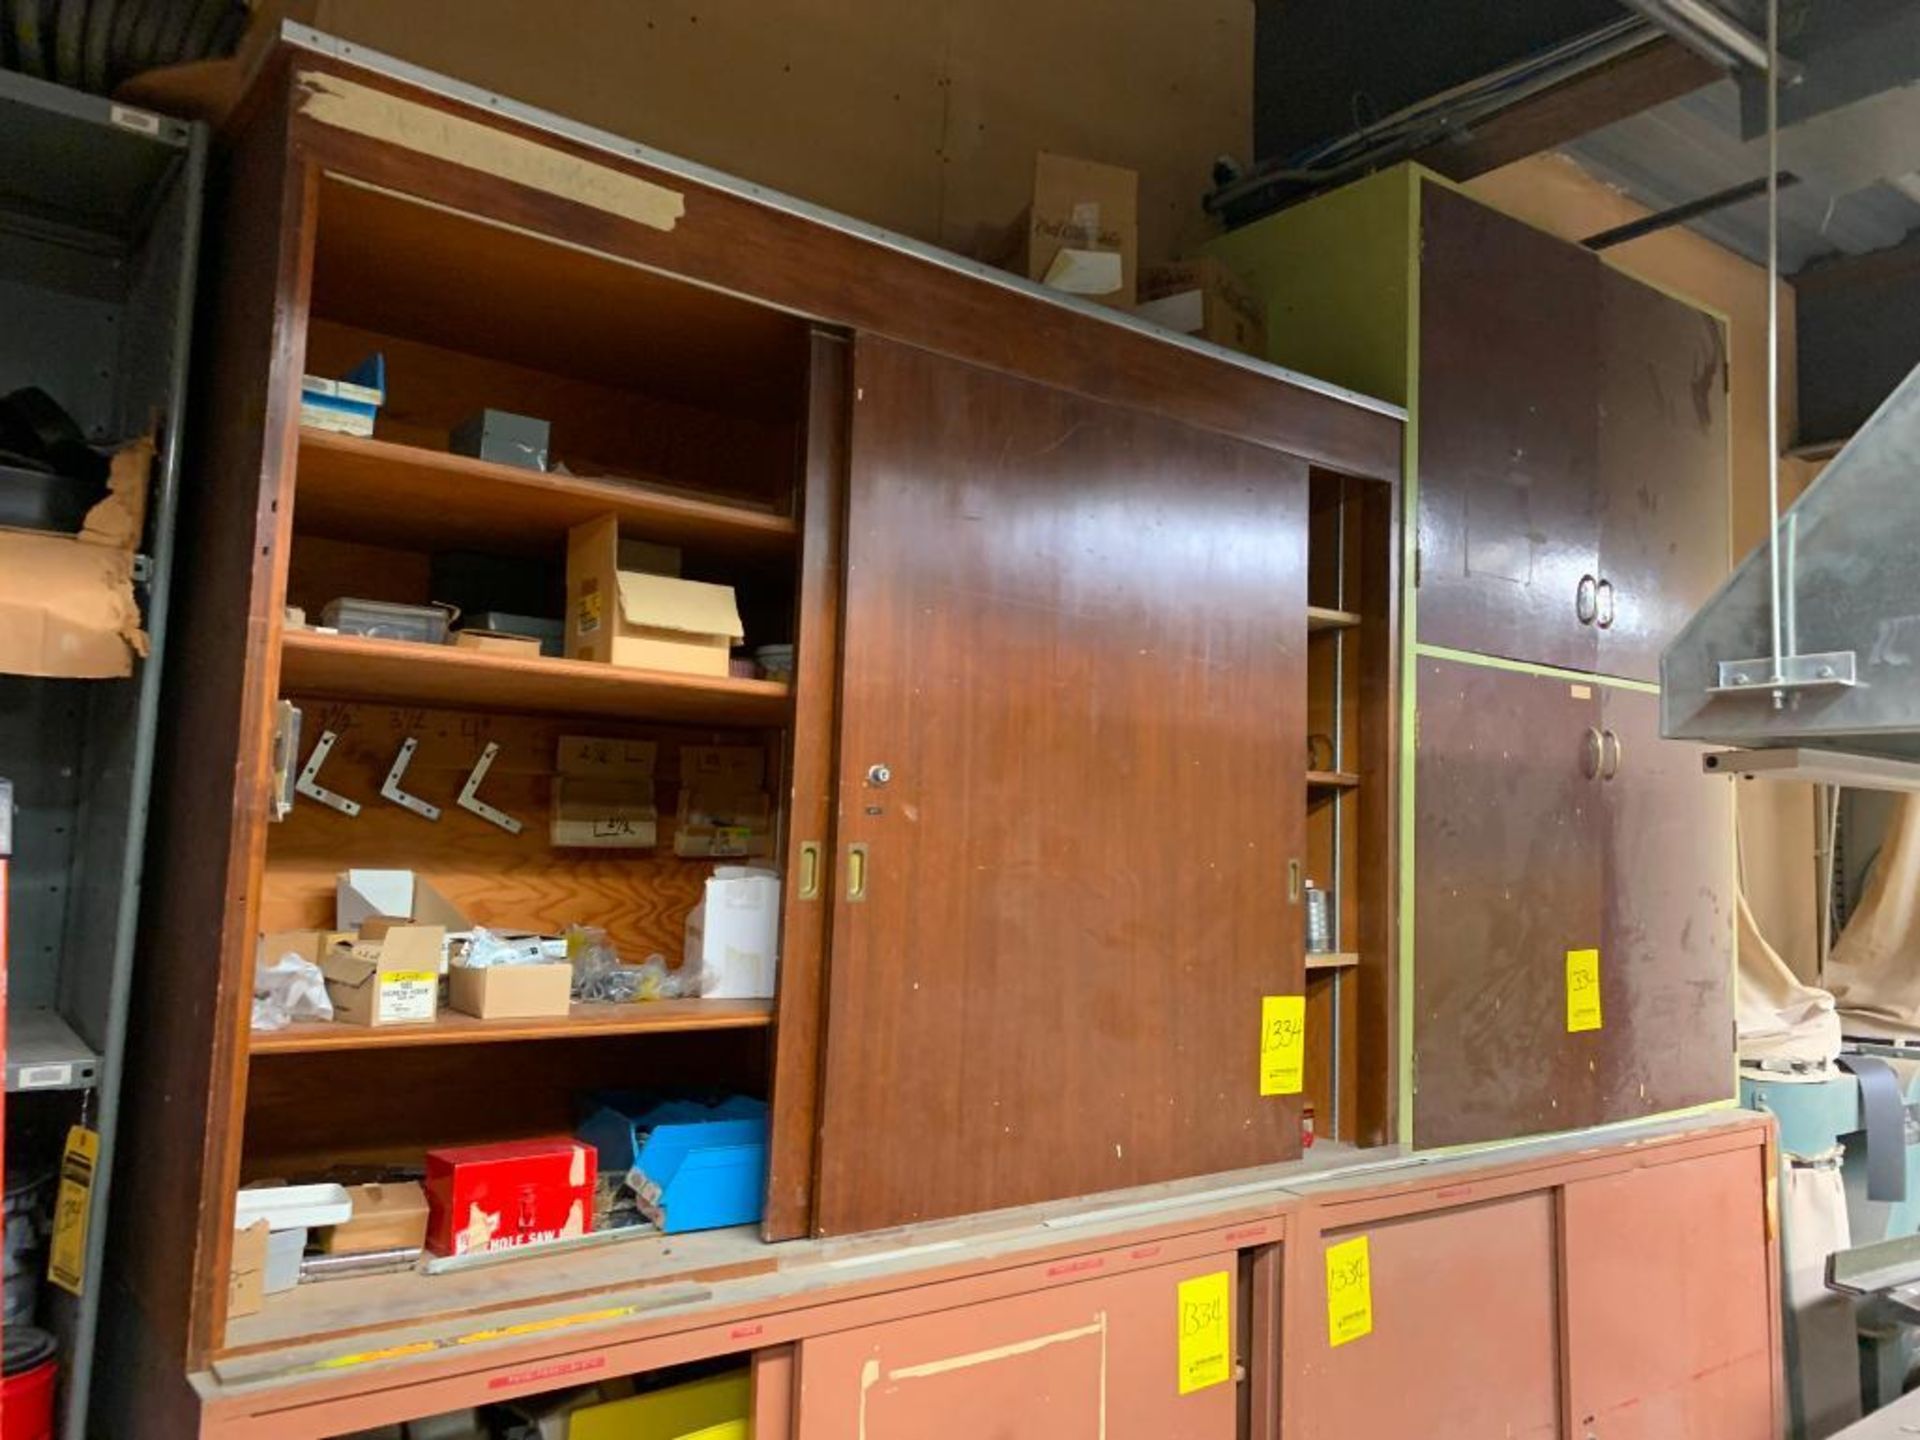 Remaining Contents of Wood Shop; Shelves, Wood Cabinets & Lockers w/ Hardware, Hand Tools, Brackets, - Image 14 of 34